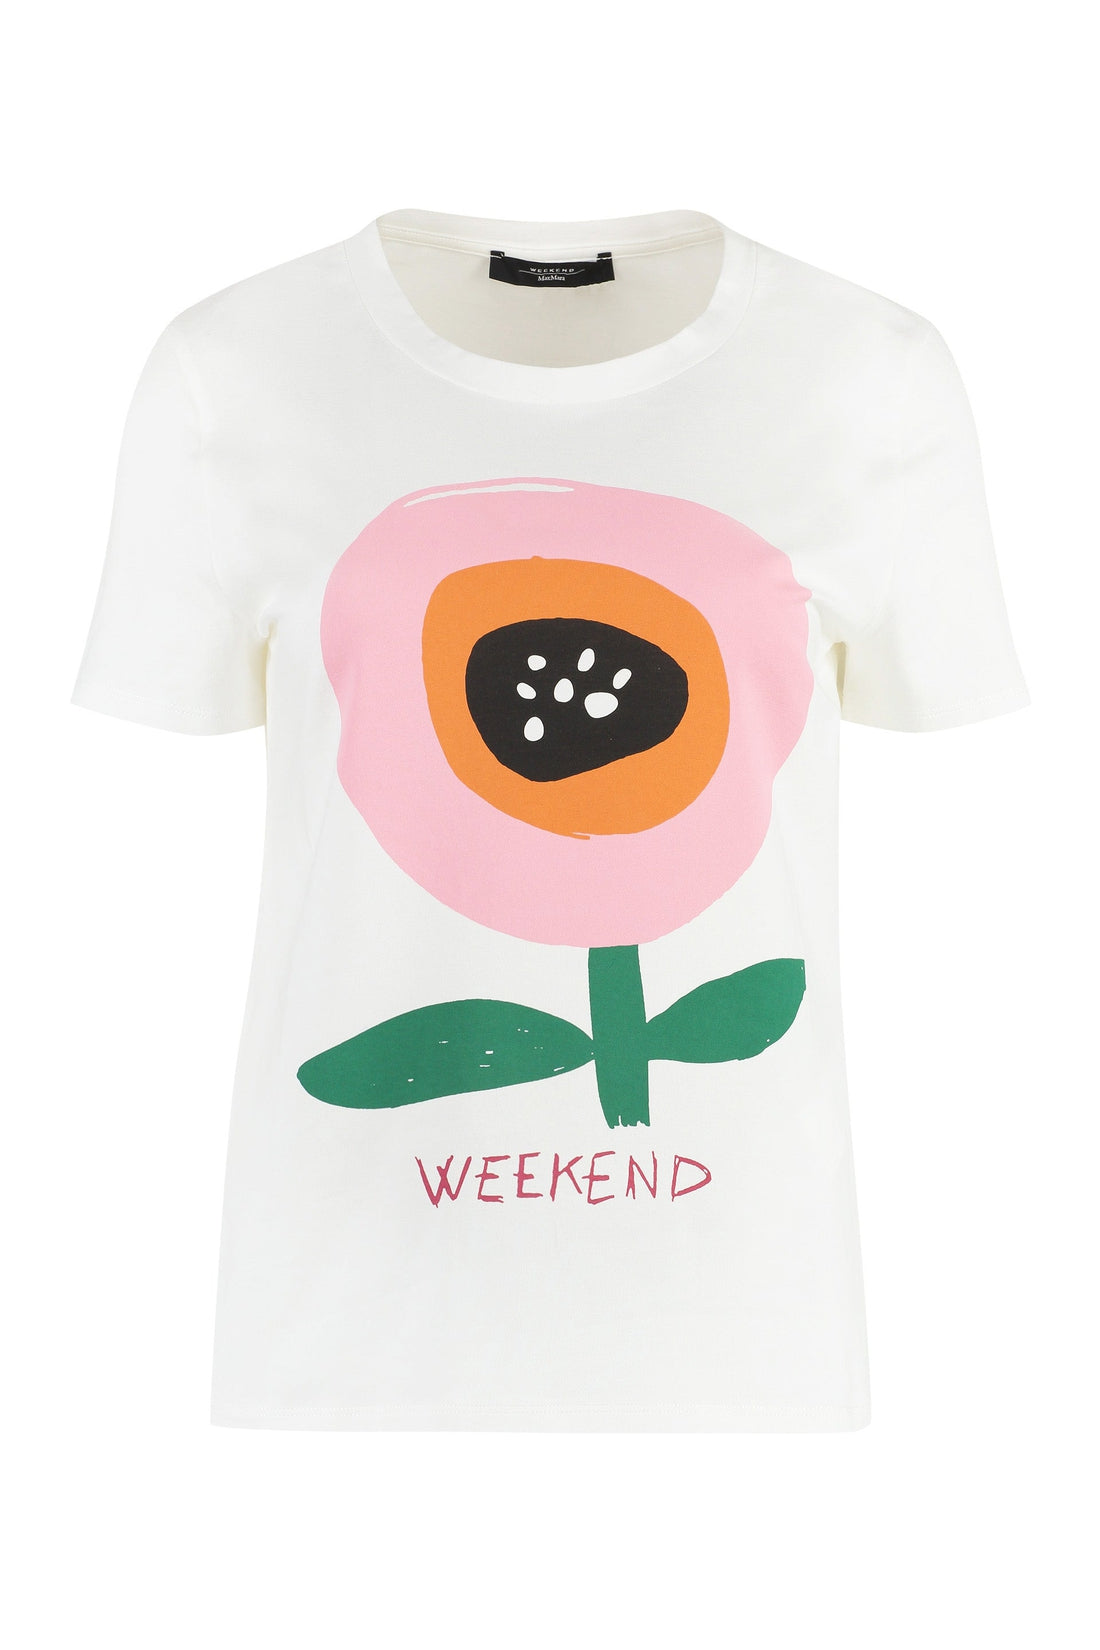 Weekend Max Mara-OUTLET-SALE-Chopin printed cotton T-shirt-ARCHIVIST